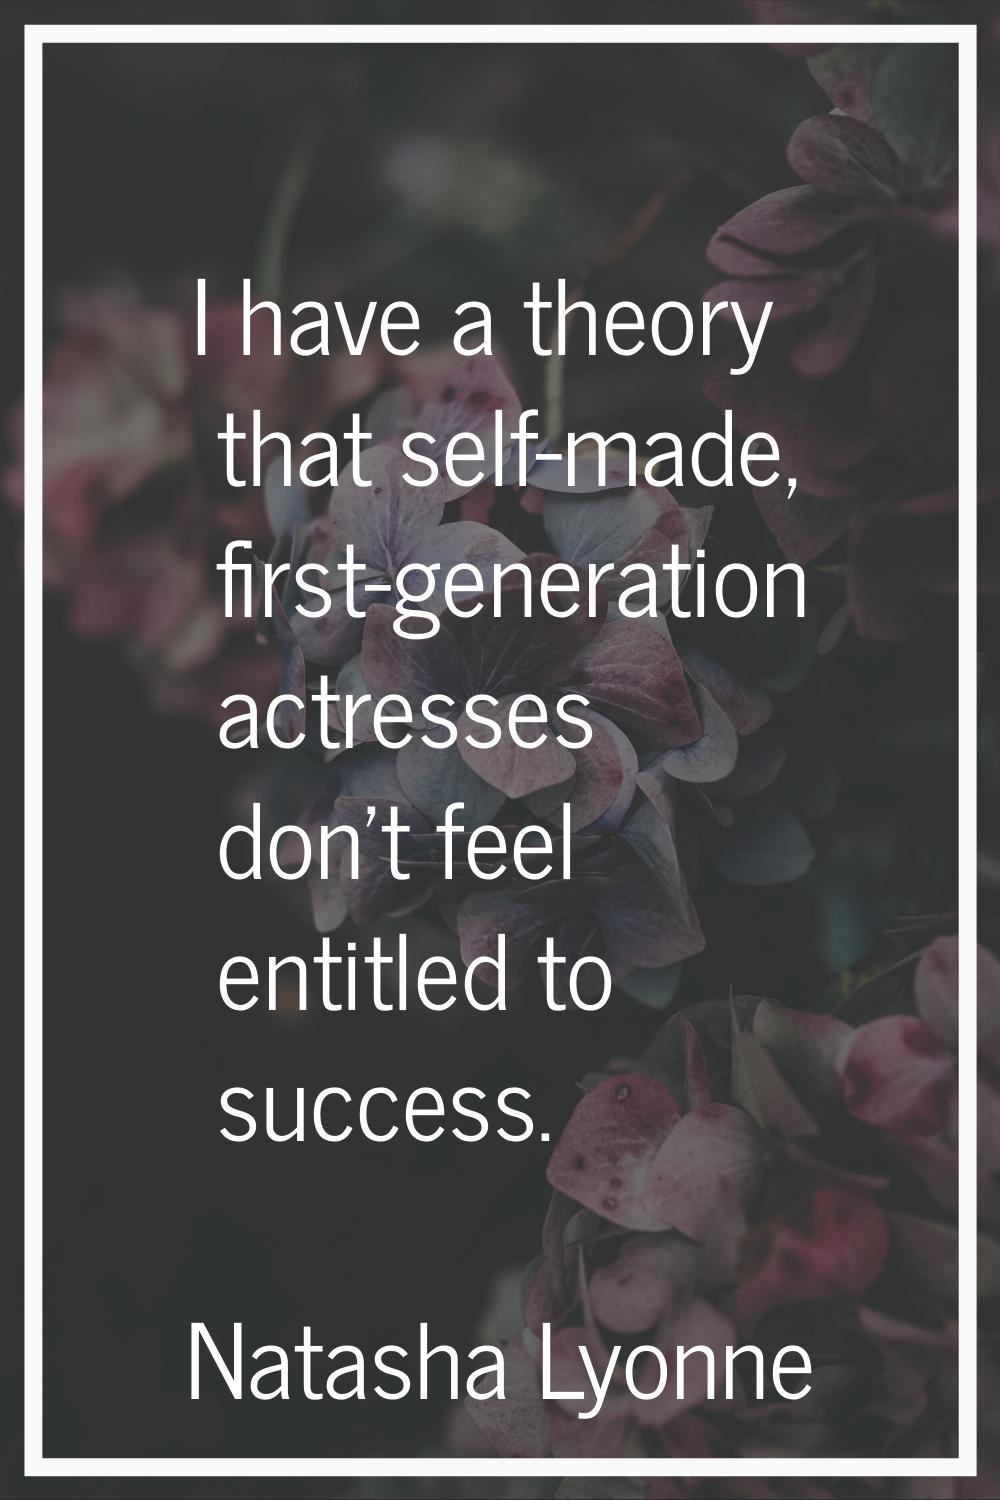 I have a theory that self-made, first-generation actresses don't feel entitled to success.